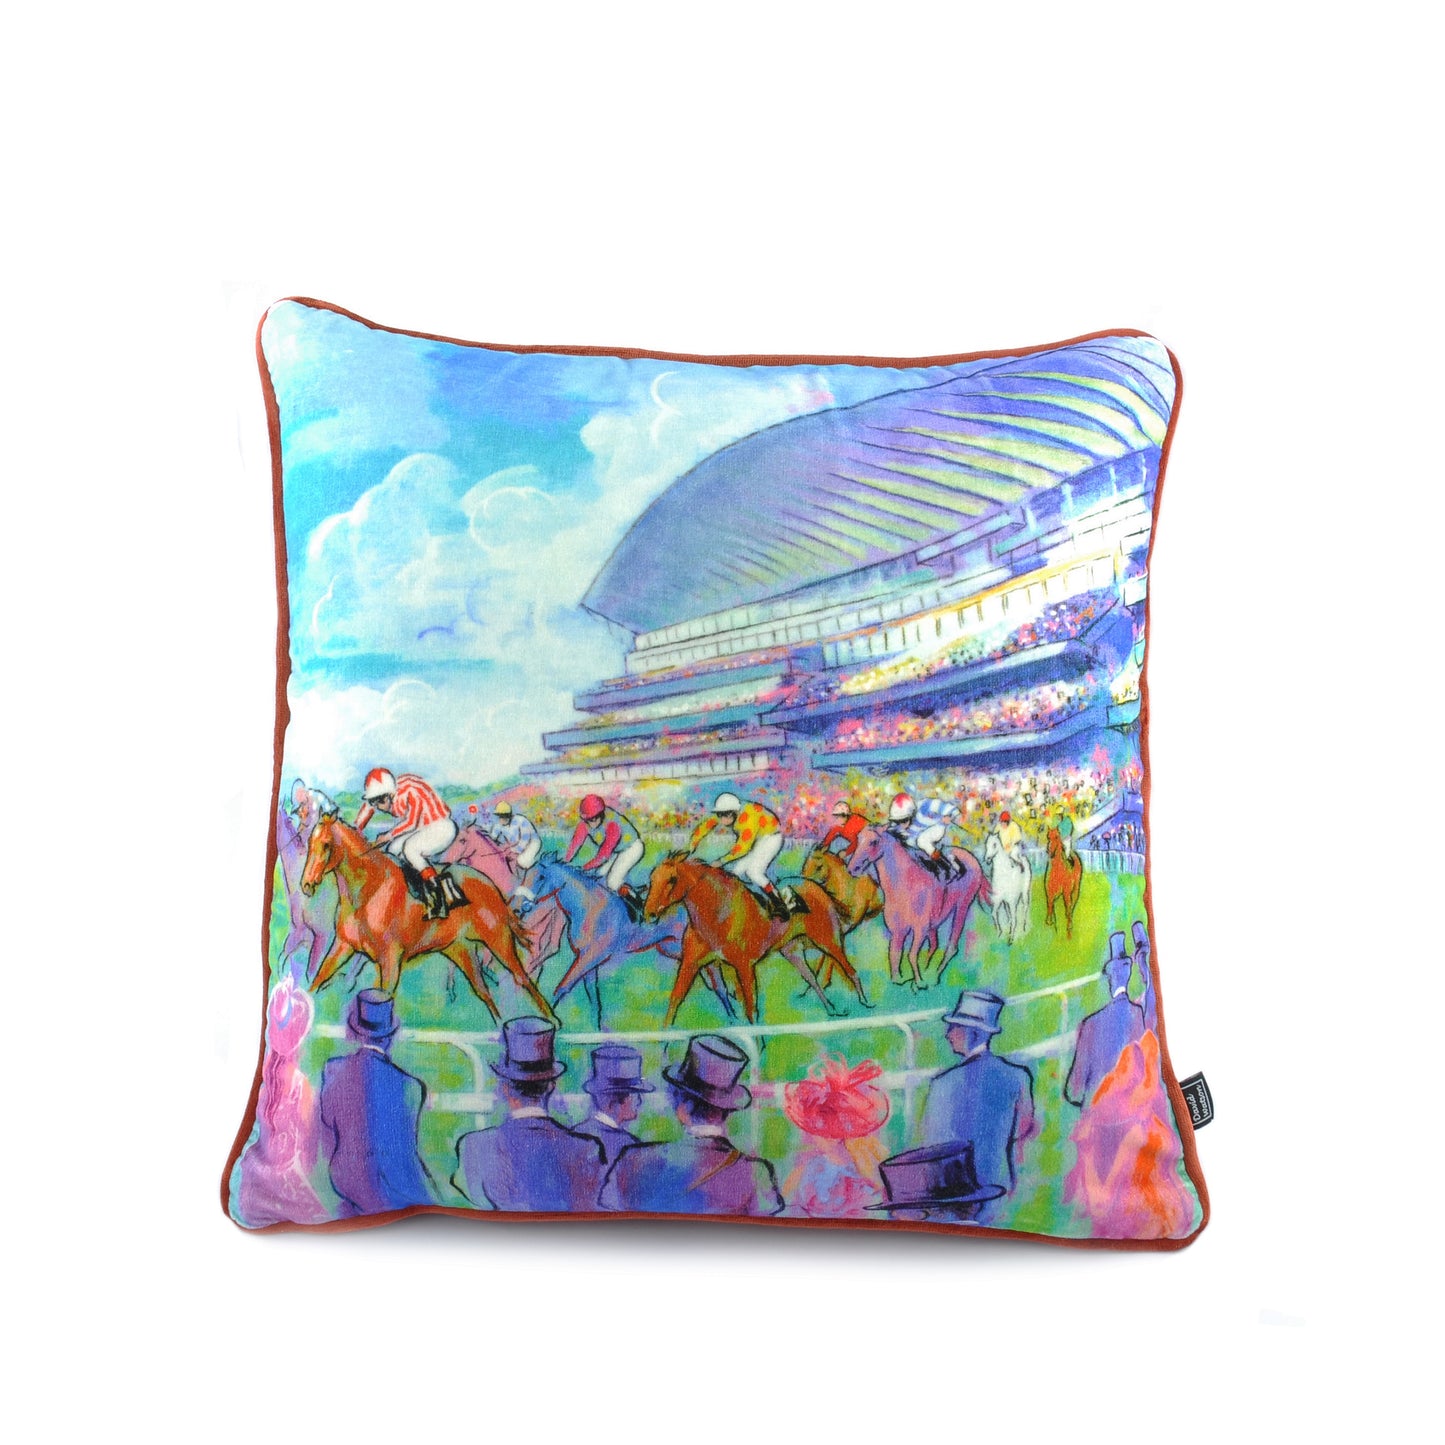 Luxury filled duck feather cushion with cotton velvet cover in a colourful Royal Ascot design of original artwork by Terence J Gilbert, with piped edging.